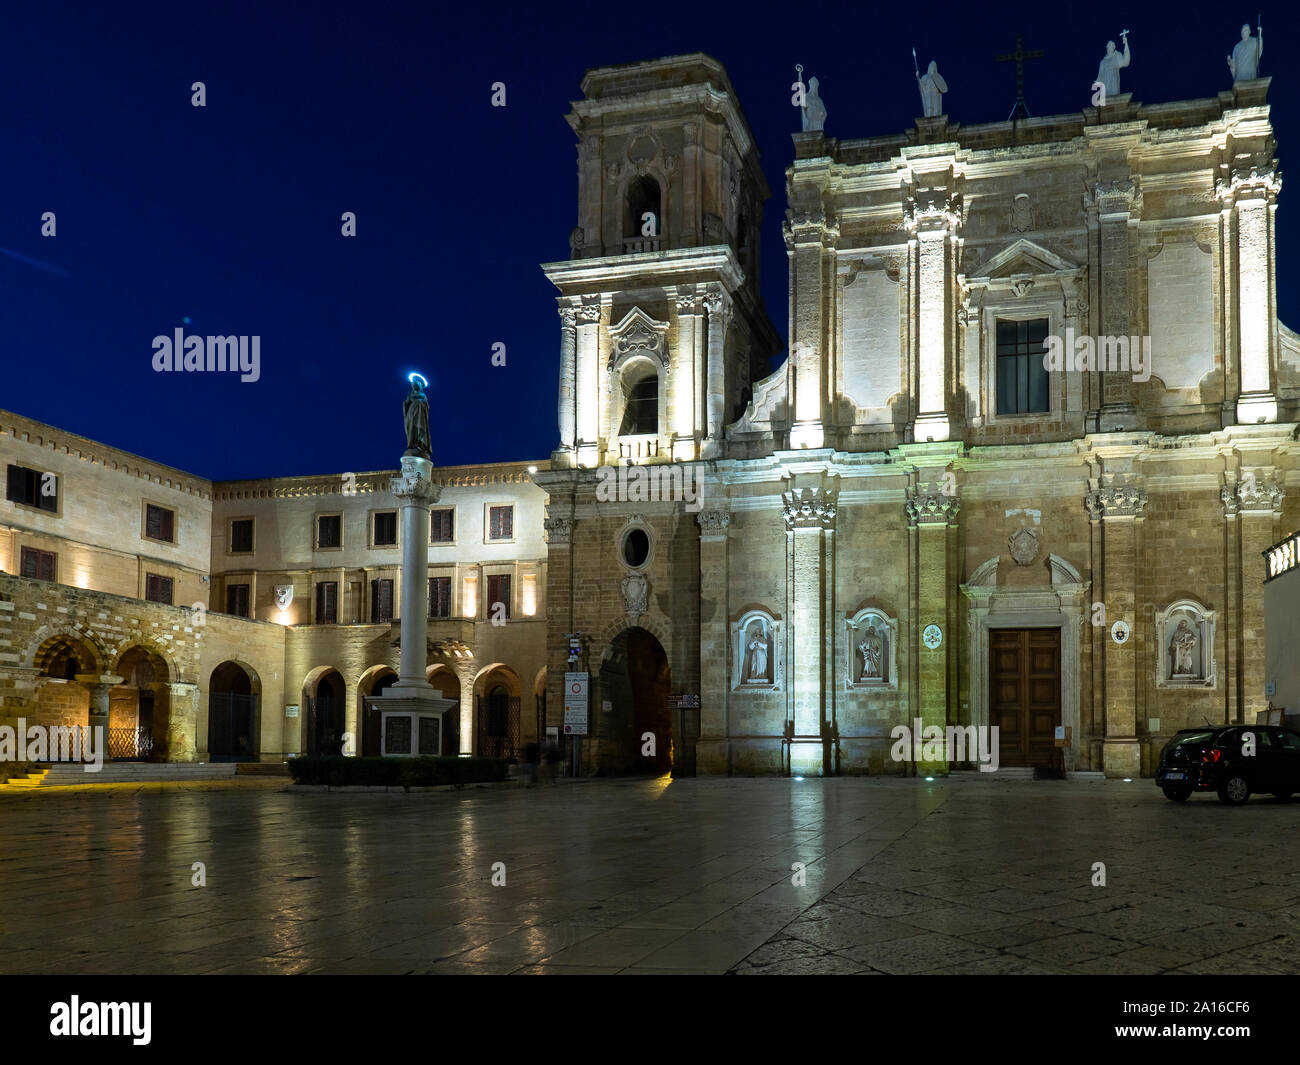 Illuminated cathedral in Brindisi against clear blue sky at night Stock Photo